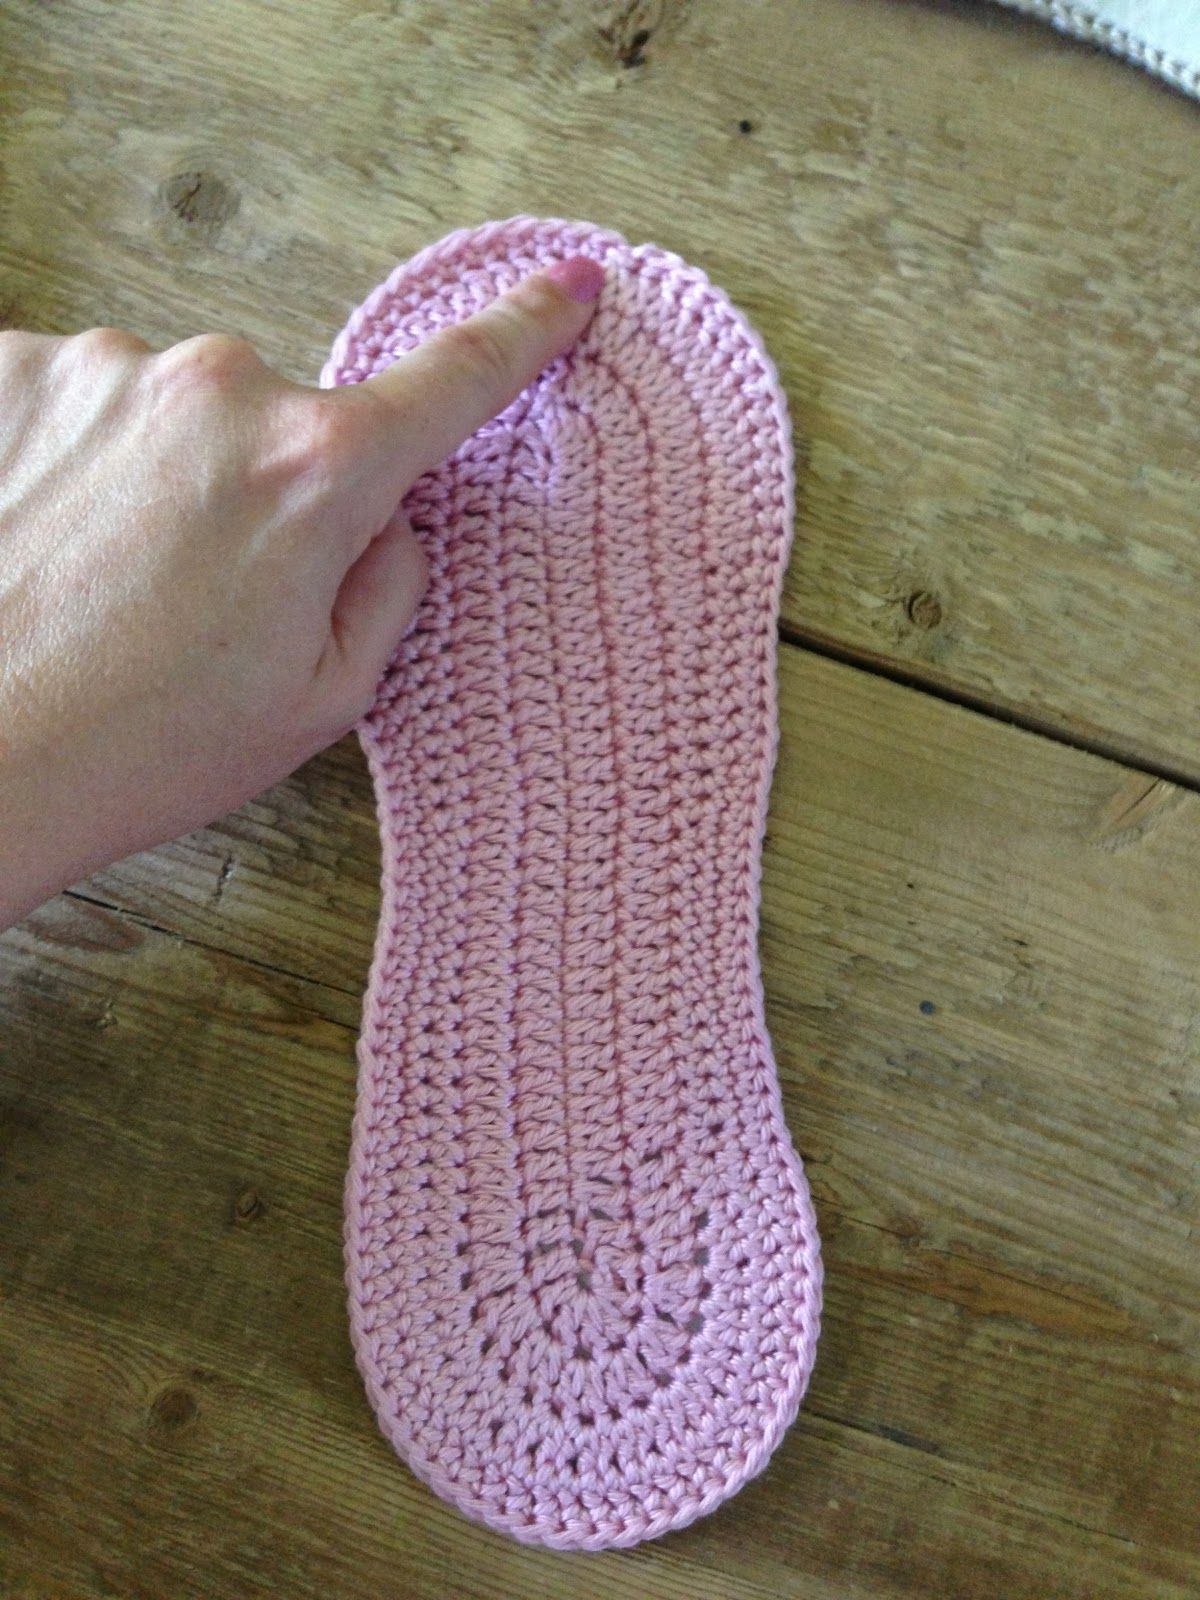 For the sole free pattern (crochet)